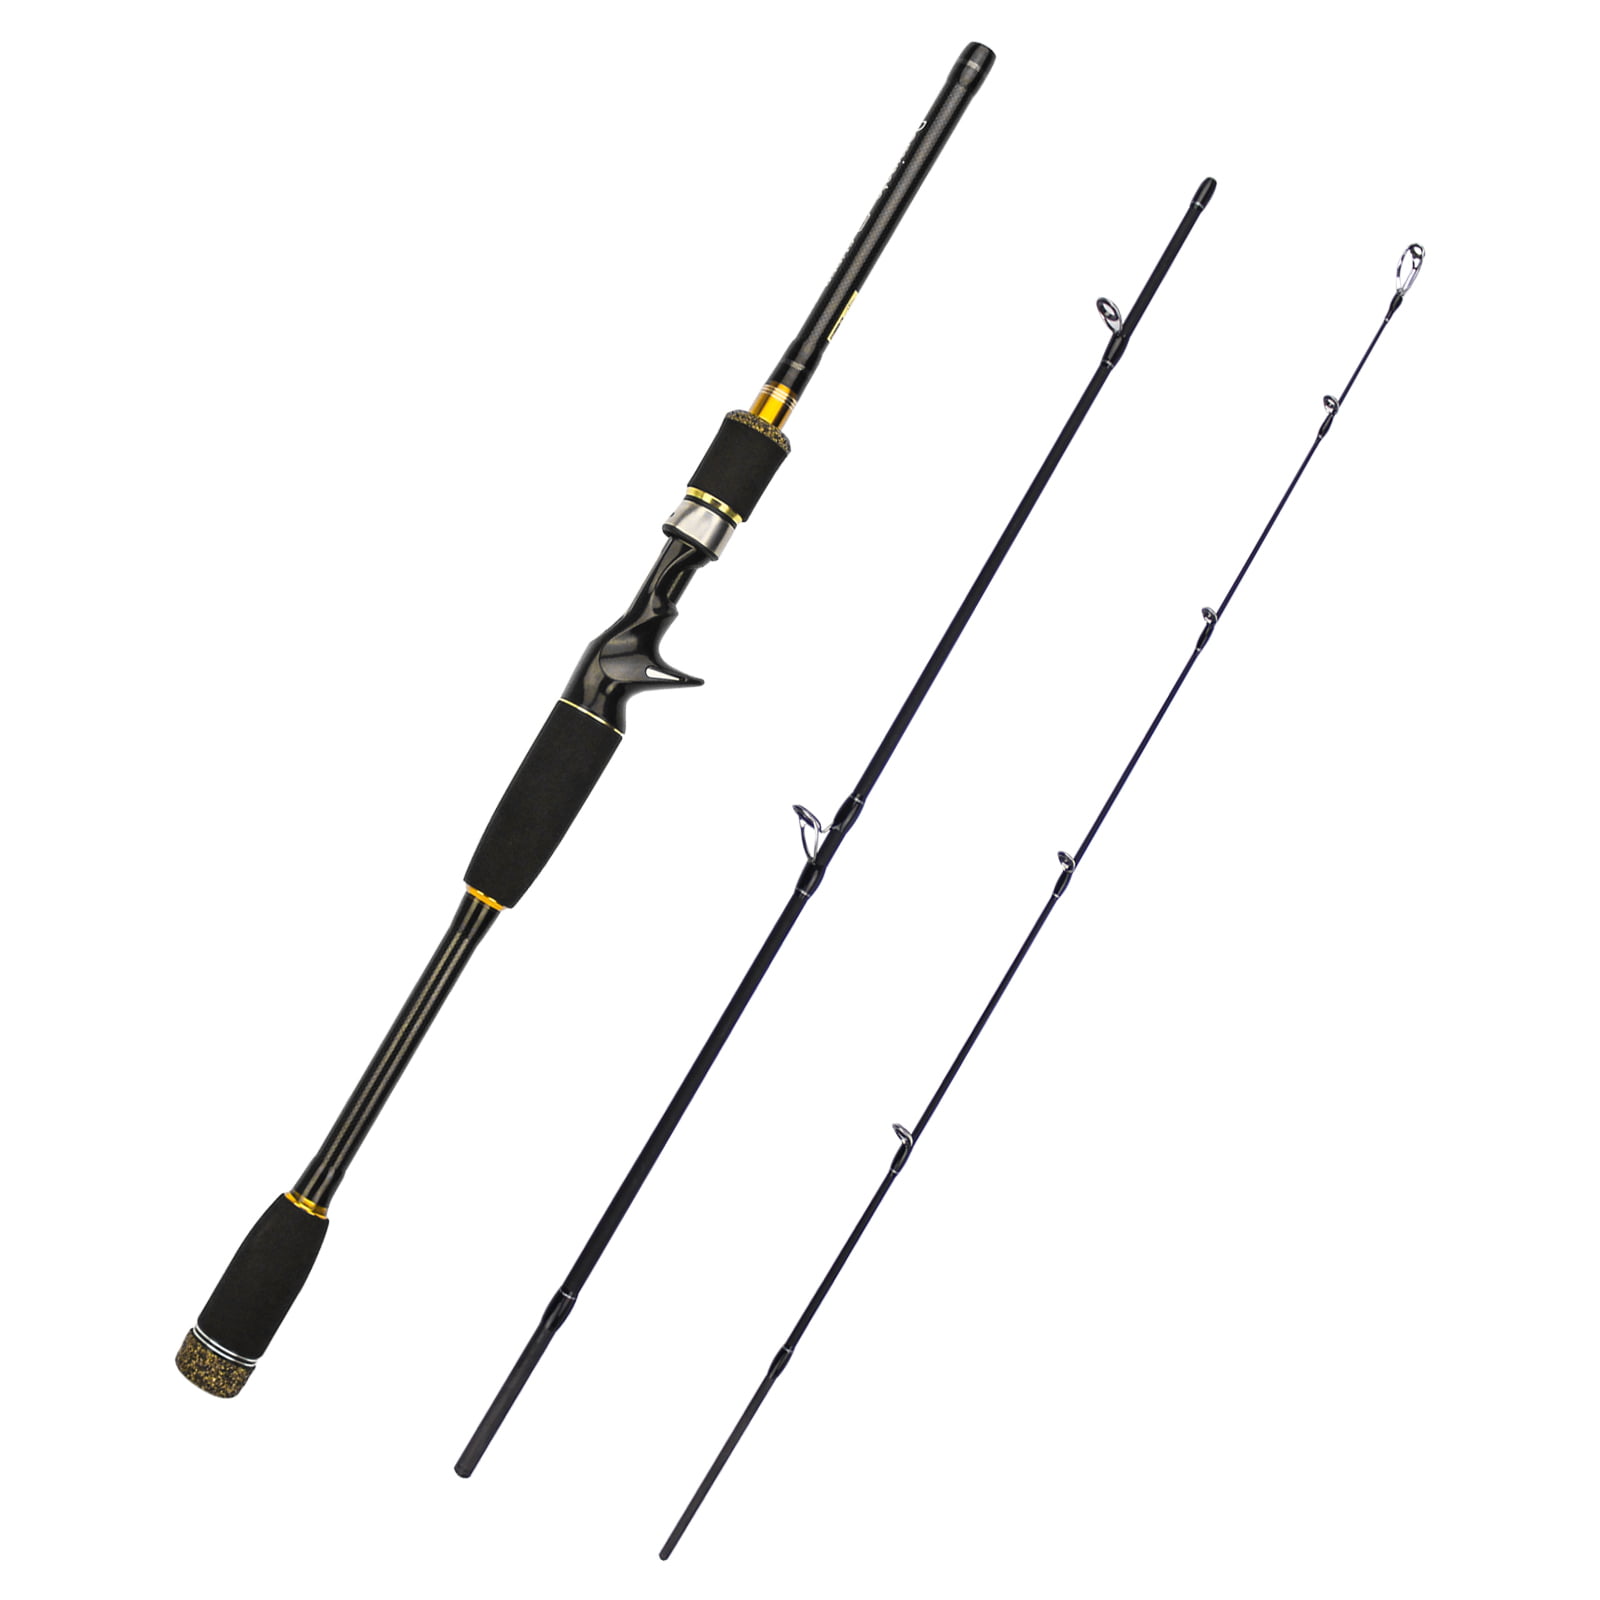 Details about  / Spinning Casting Telescopic Fishing Rod 1.8m 2.1m 2.4m 2.7m Carbon M Power Rod